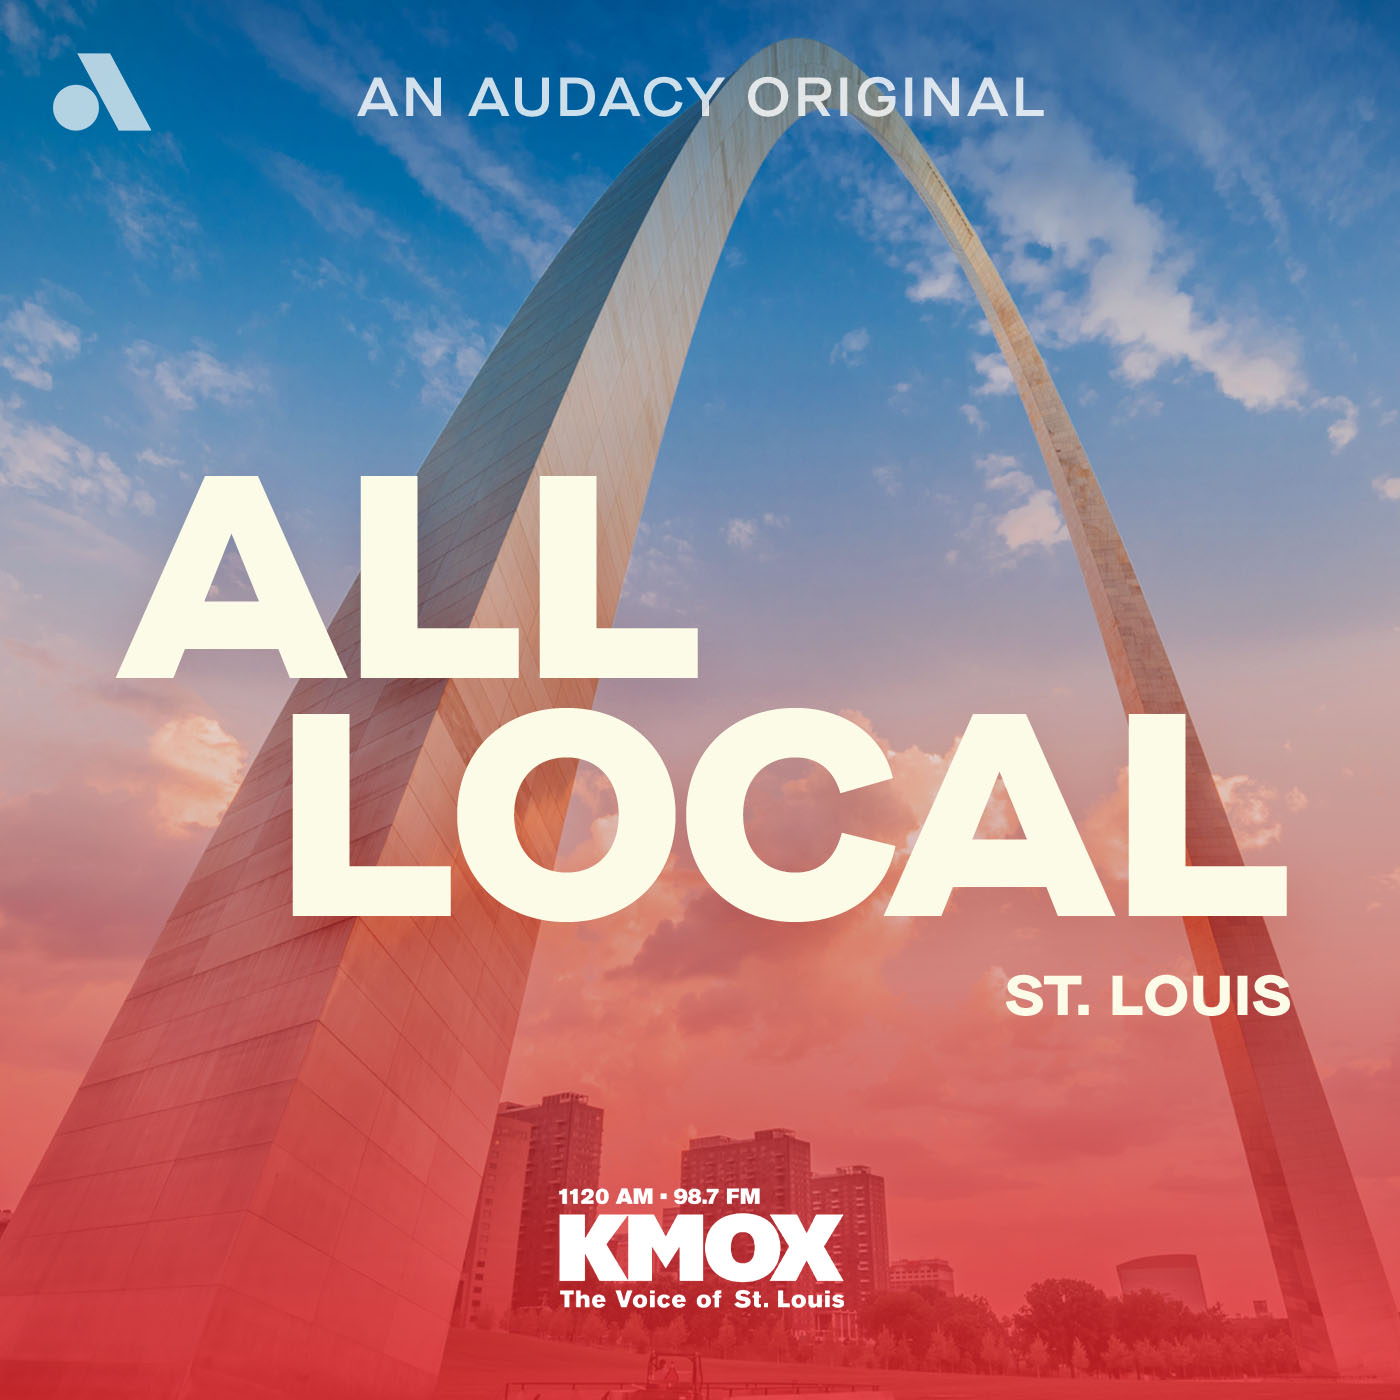 St. Louis All Local AM: Christopher Dunn stopped at prison doors